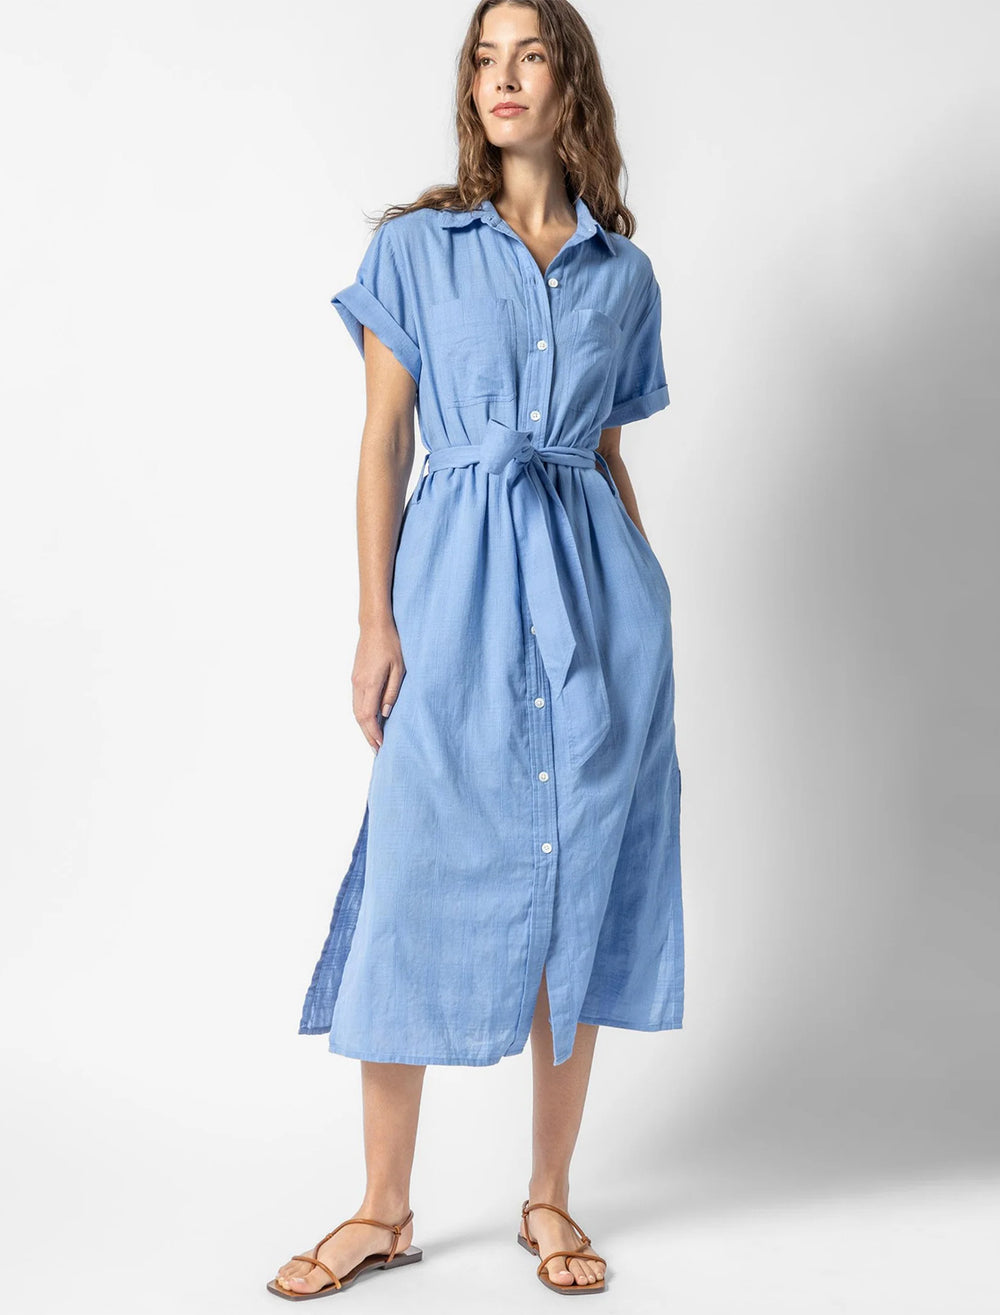 Model wearing Lilla P.'s belted shirtdress in harbor